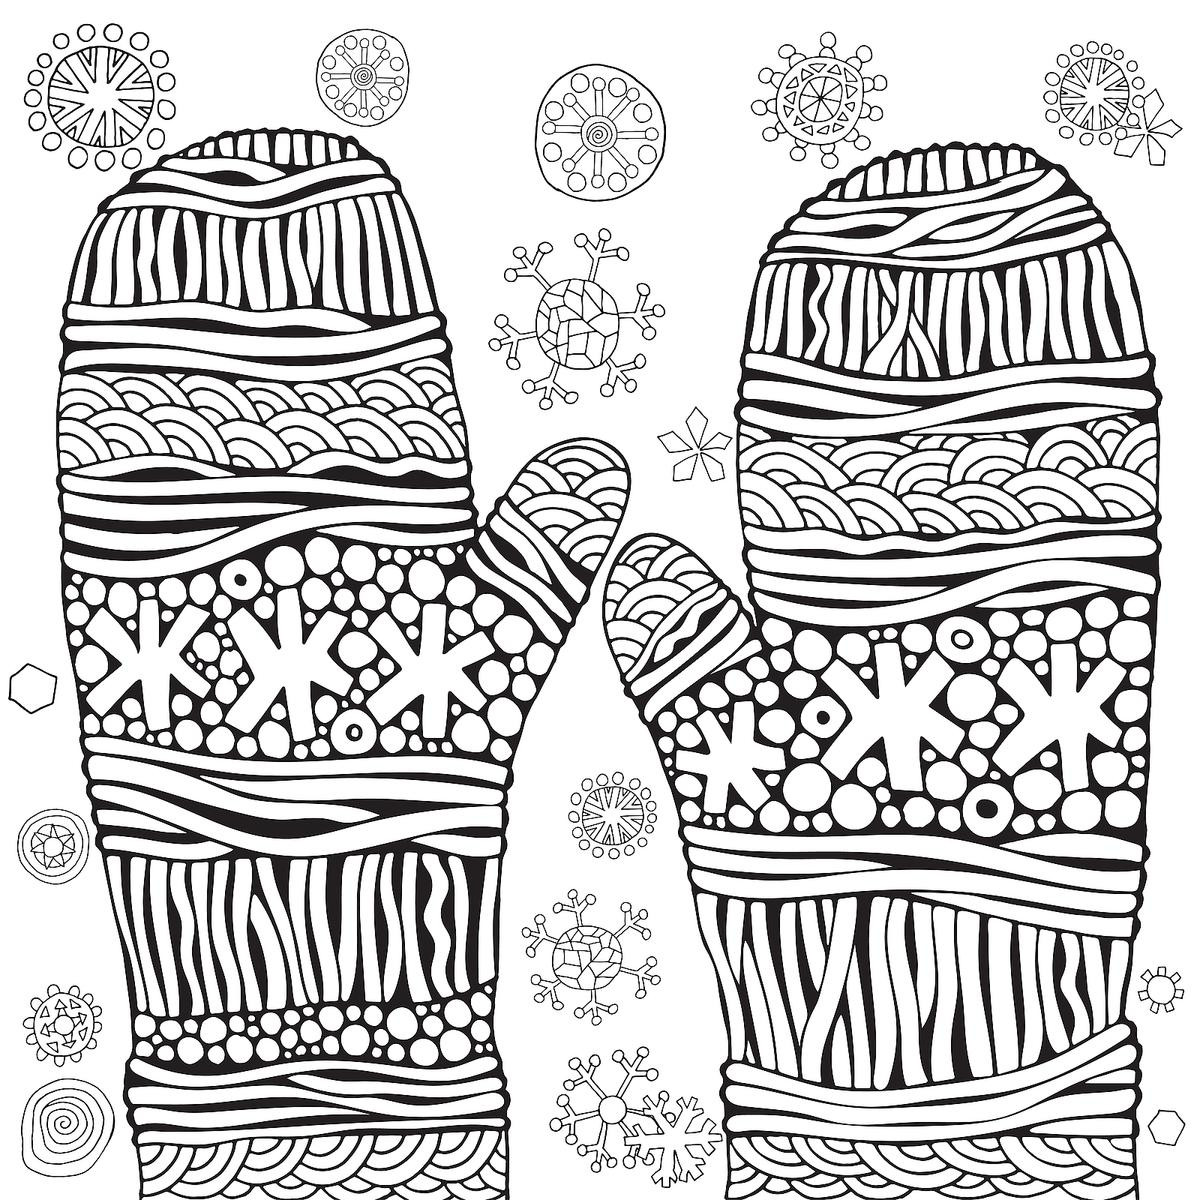 Winter Coloring Sheets For Kids
 Winter Puzzle & Coloring Pages Printable Winter Themed